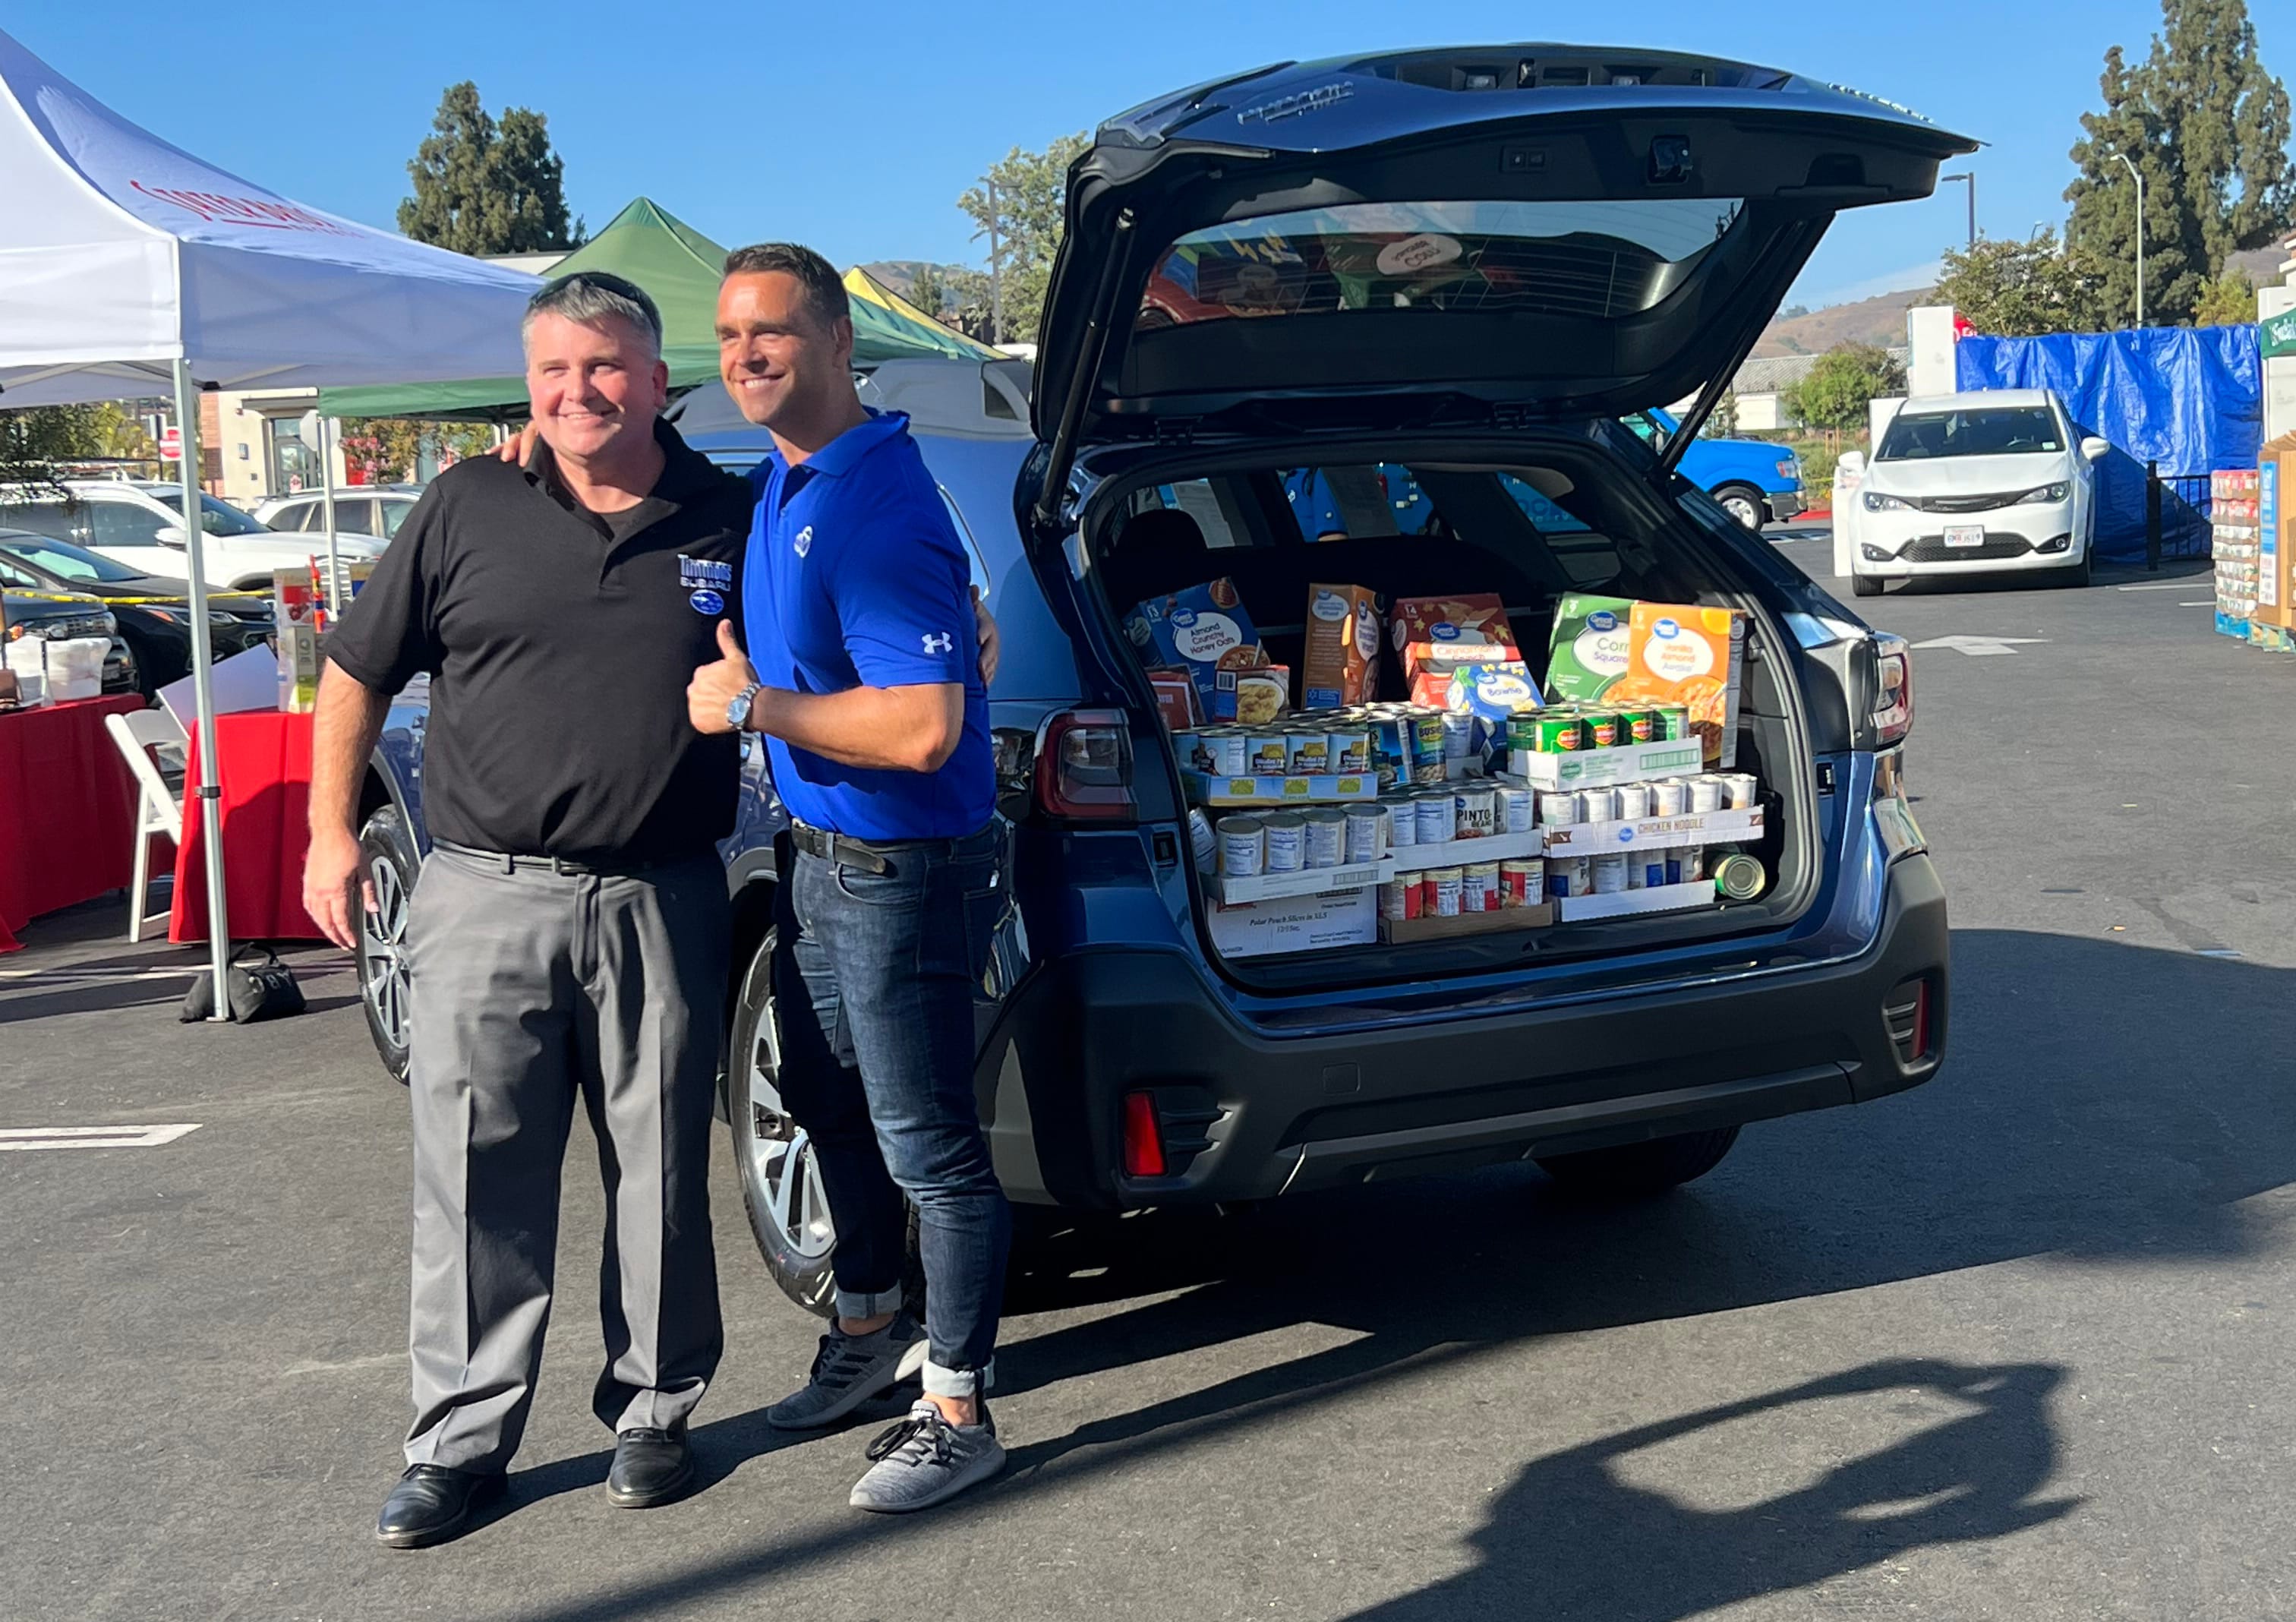 Timmons in the Community and ABC7 Annual Feed SoCal Food Drive